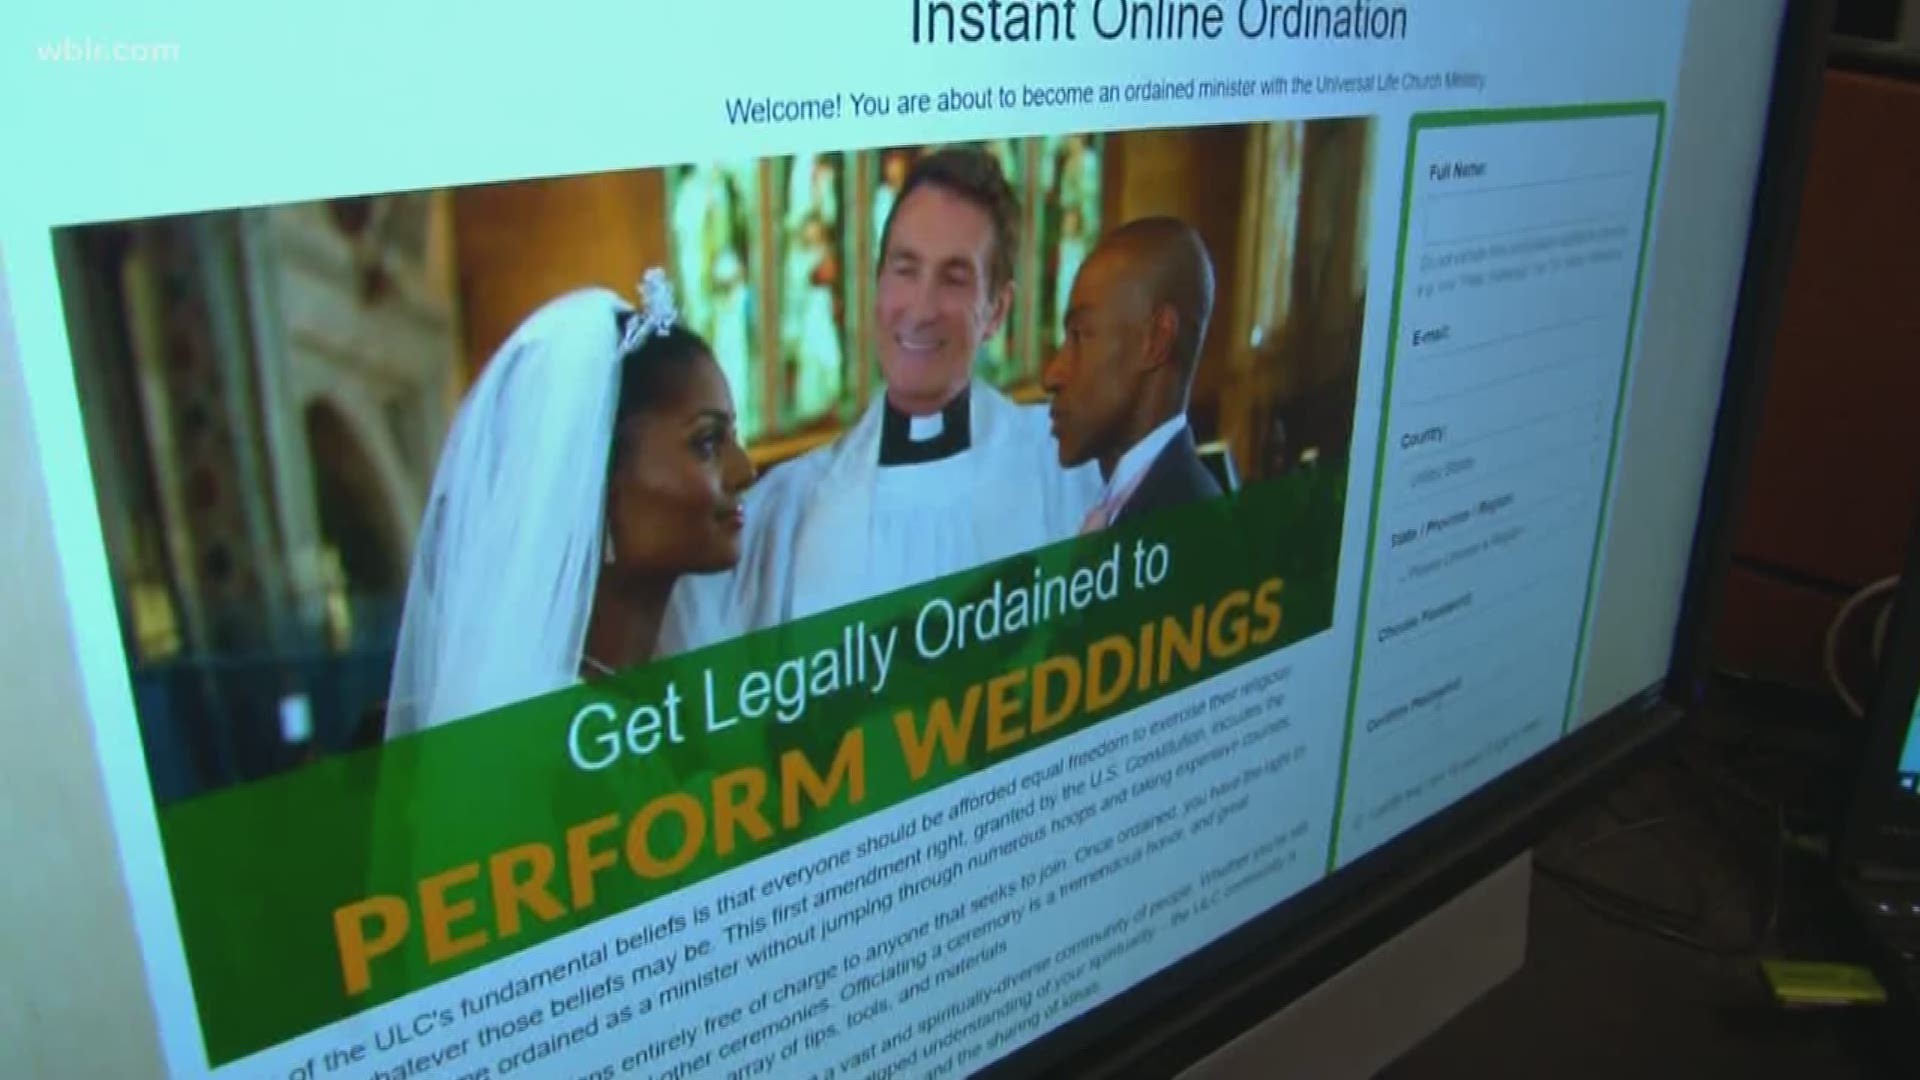 As of July 1st, internet ordained ministers will no longer have the authority to solemnize weddings.